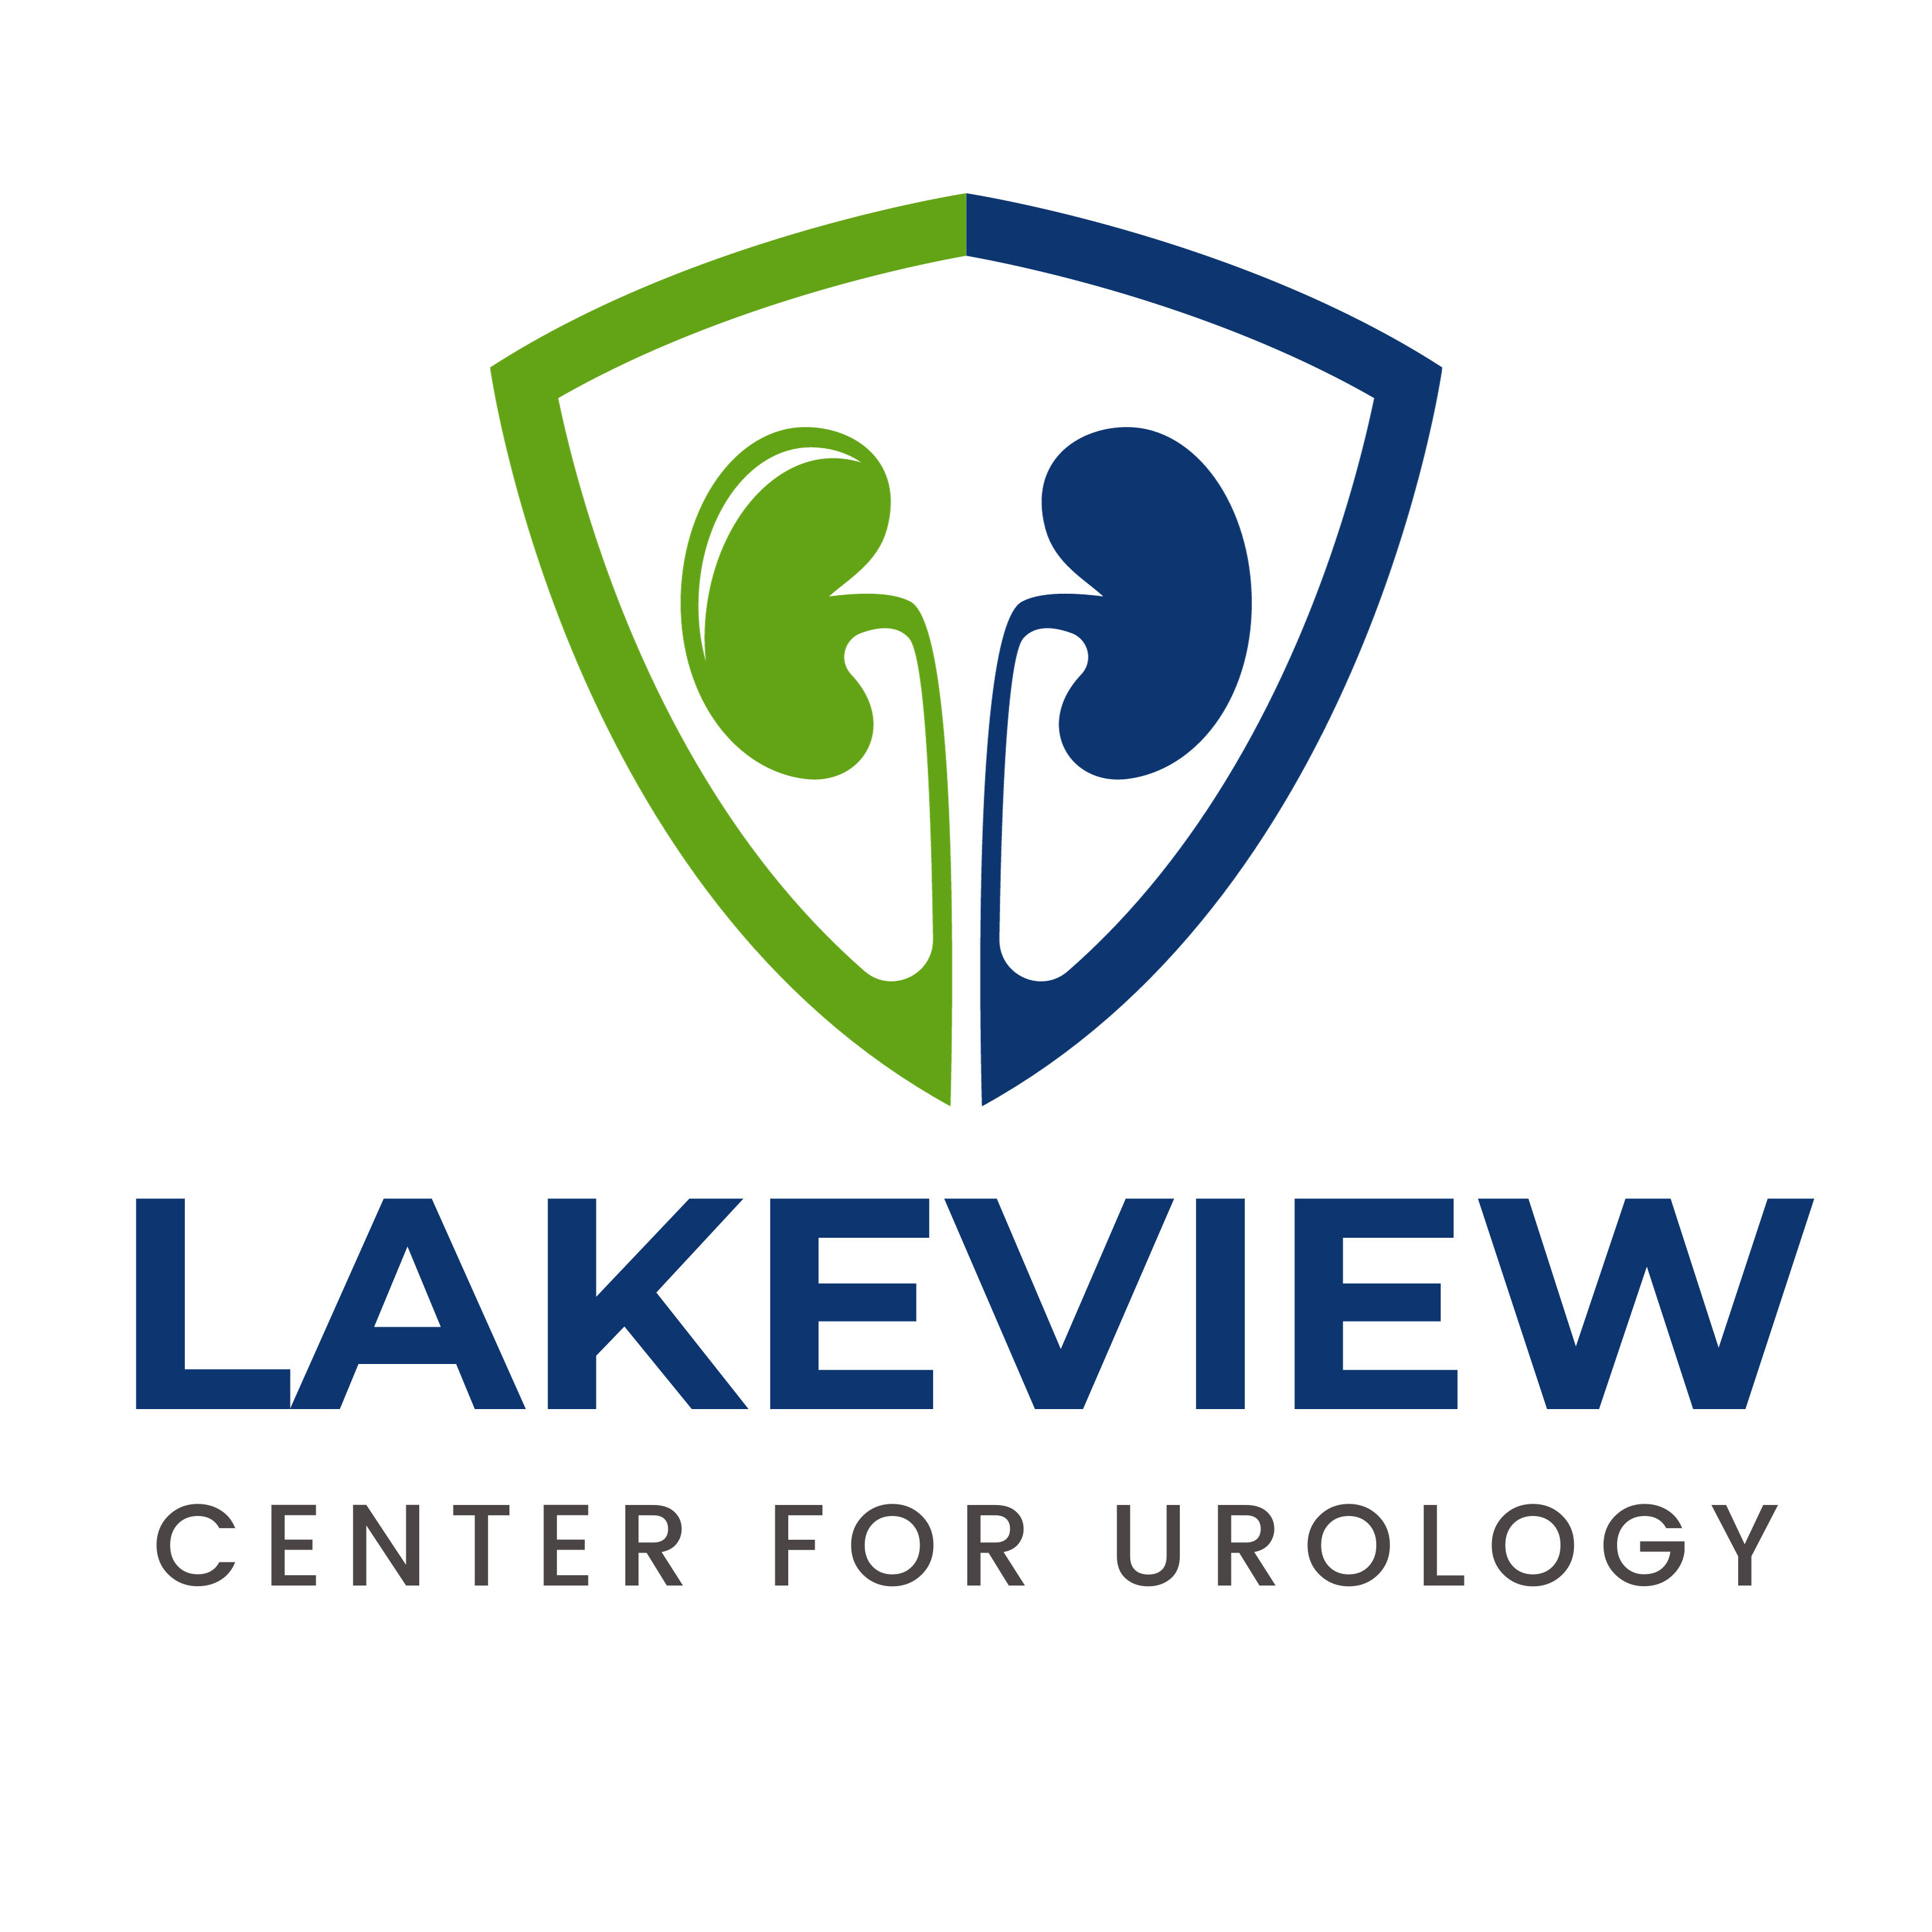 Lakeview Center for Urology